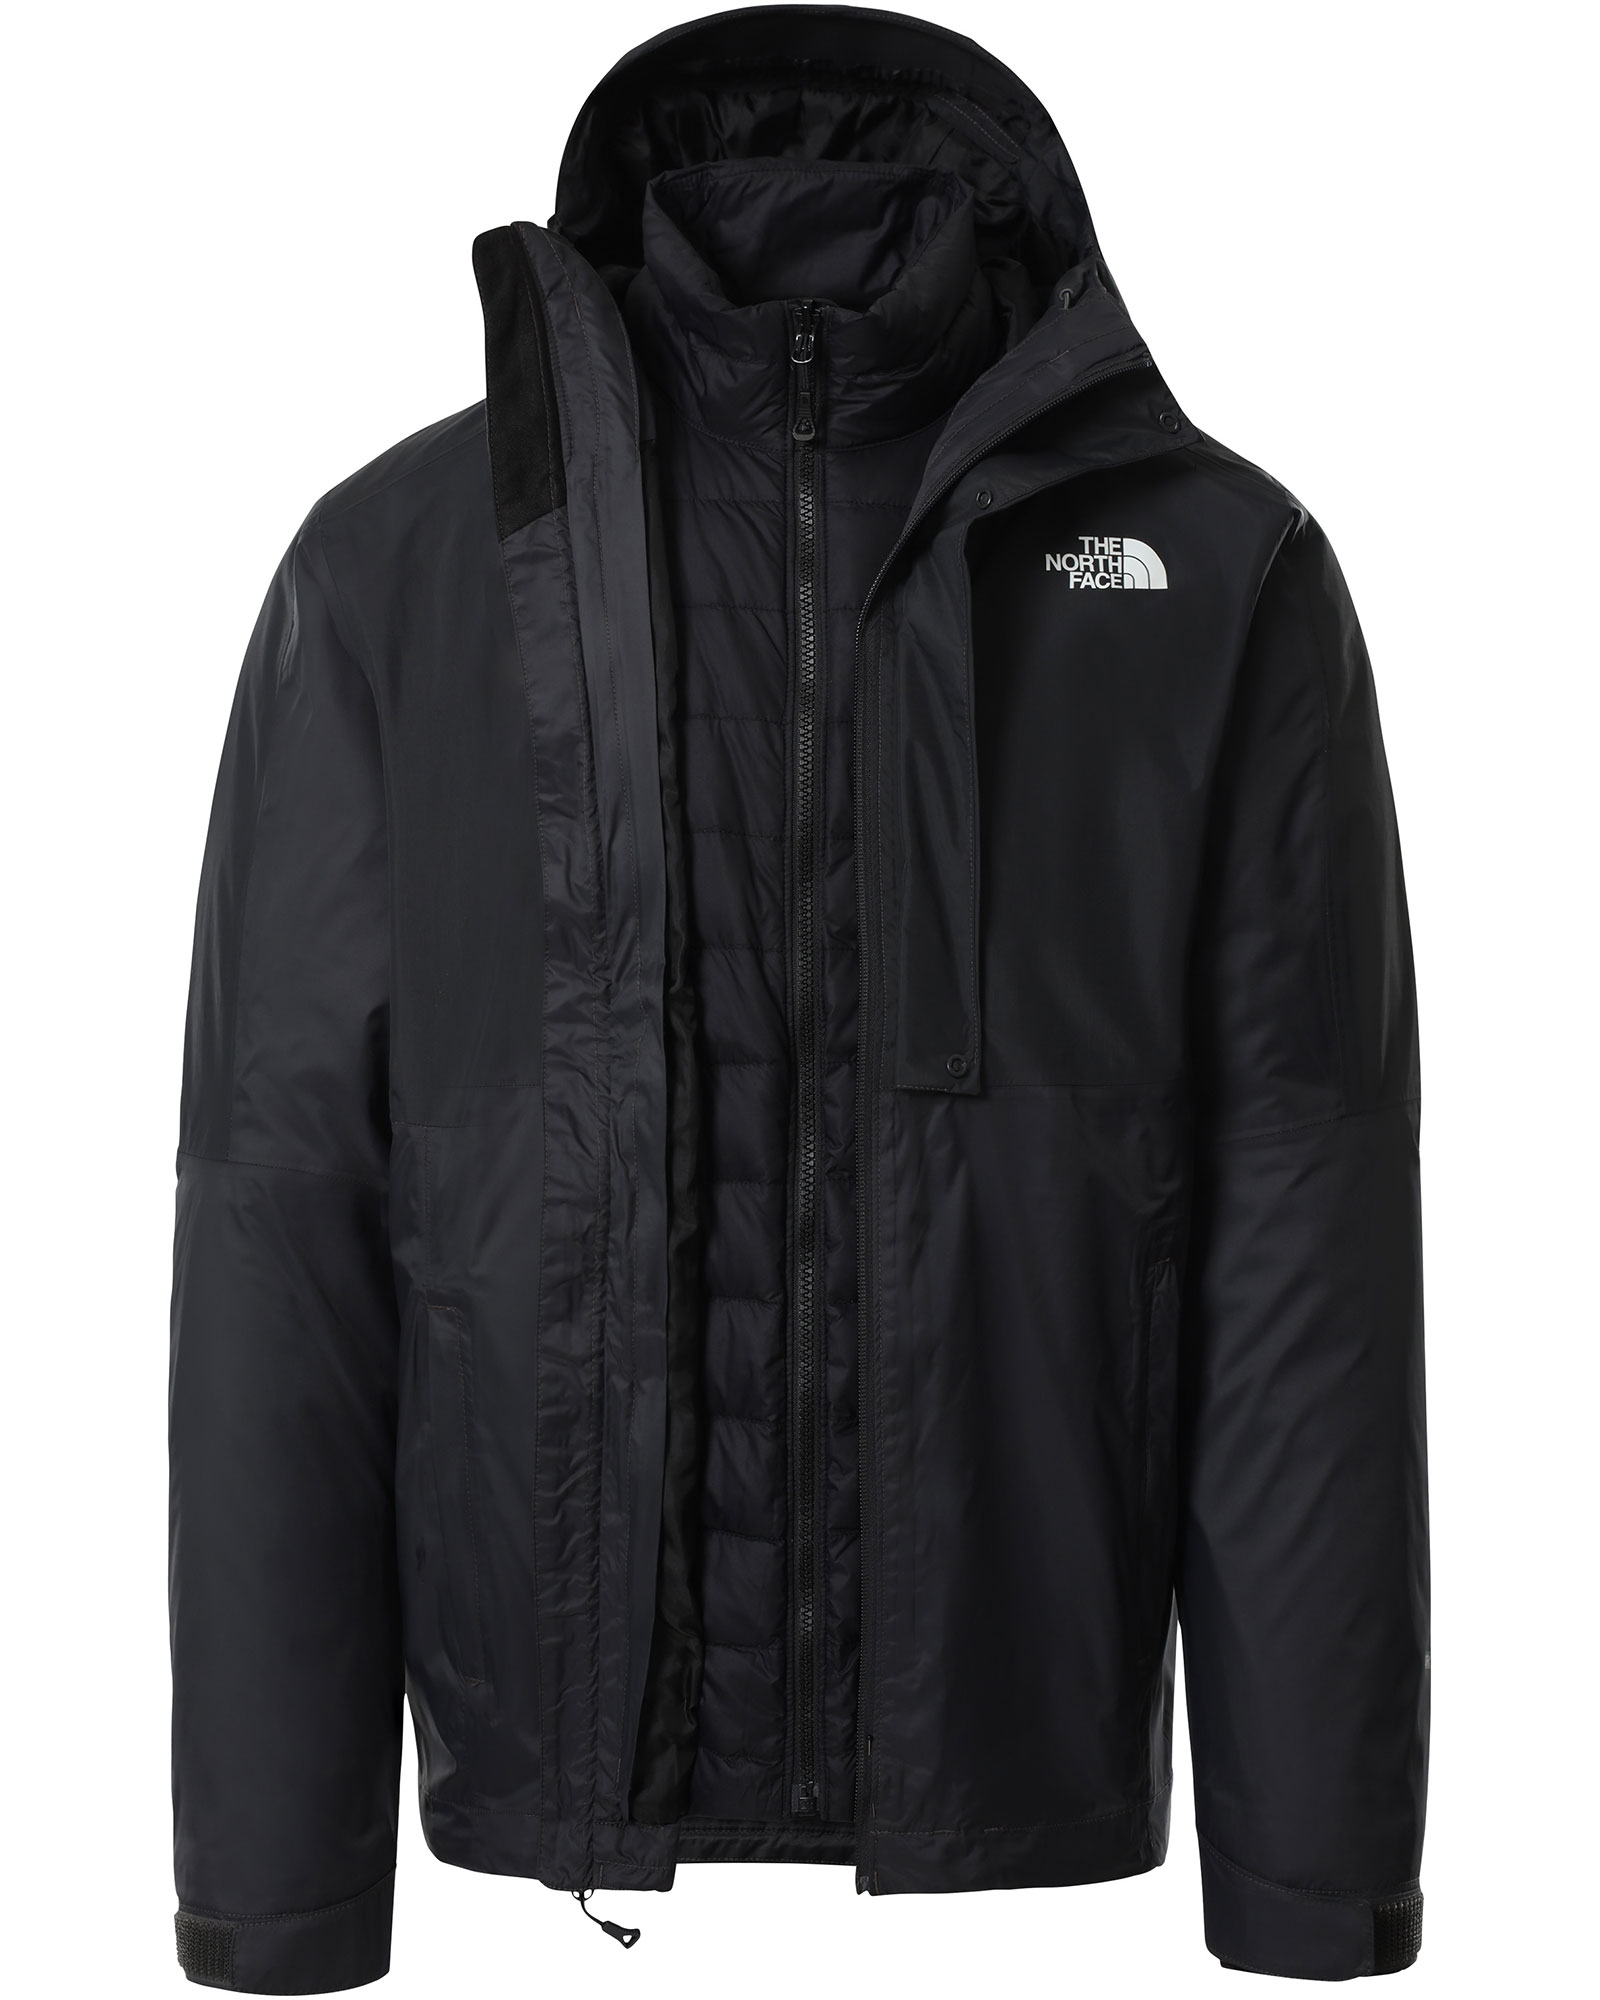 The North Face Down Triclimate DryVent Men’s Jacket - Asphalt Grey S